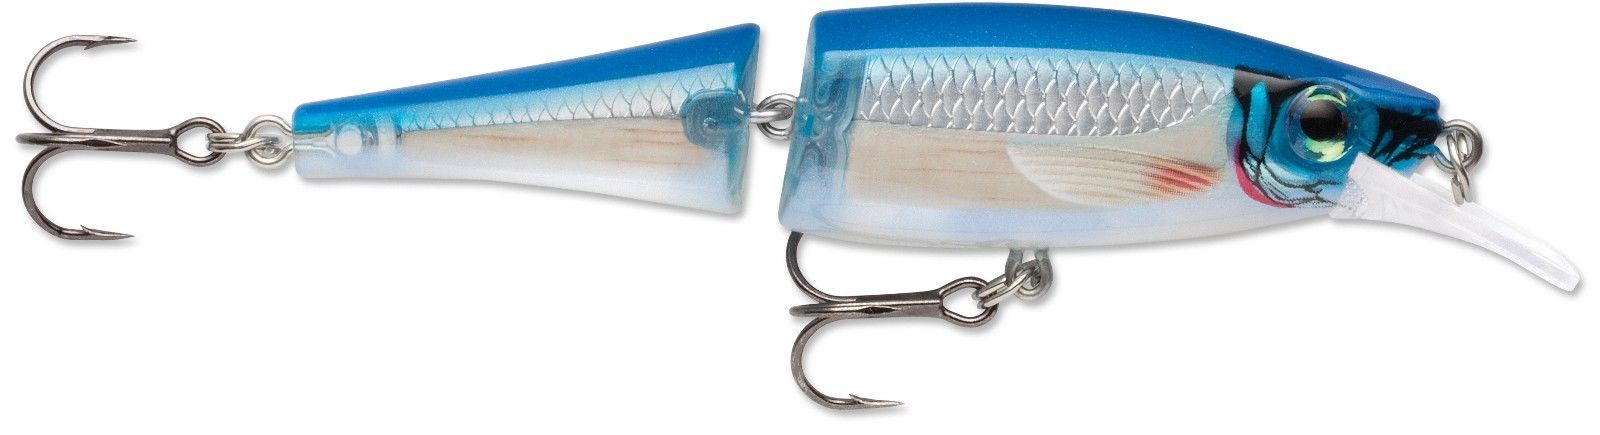 Bx® jointed minnow